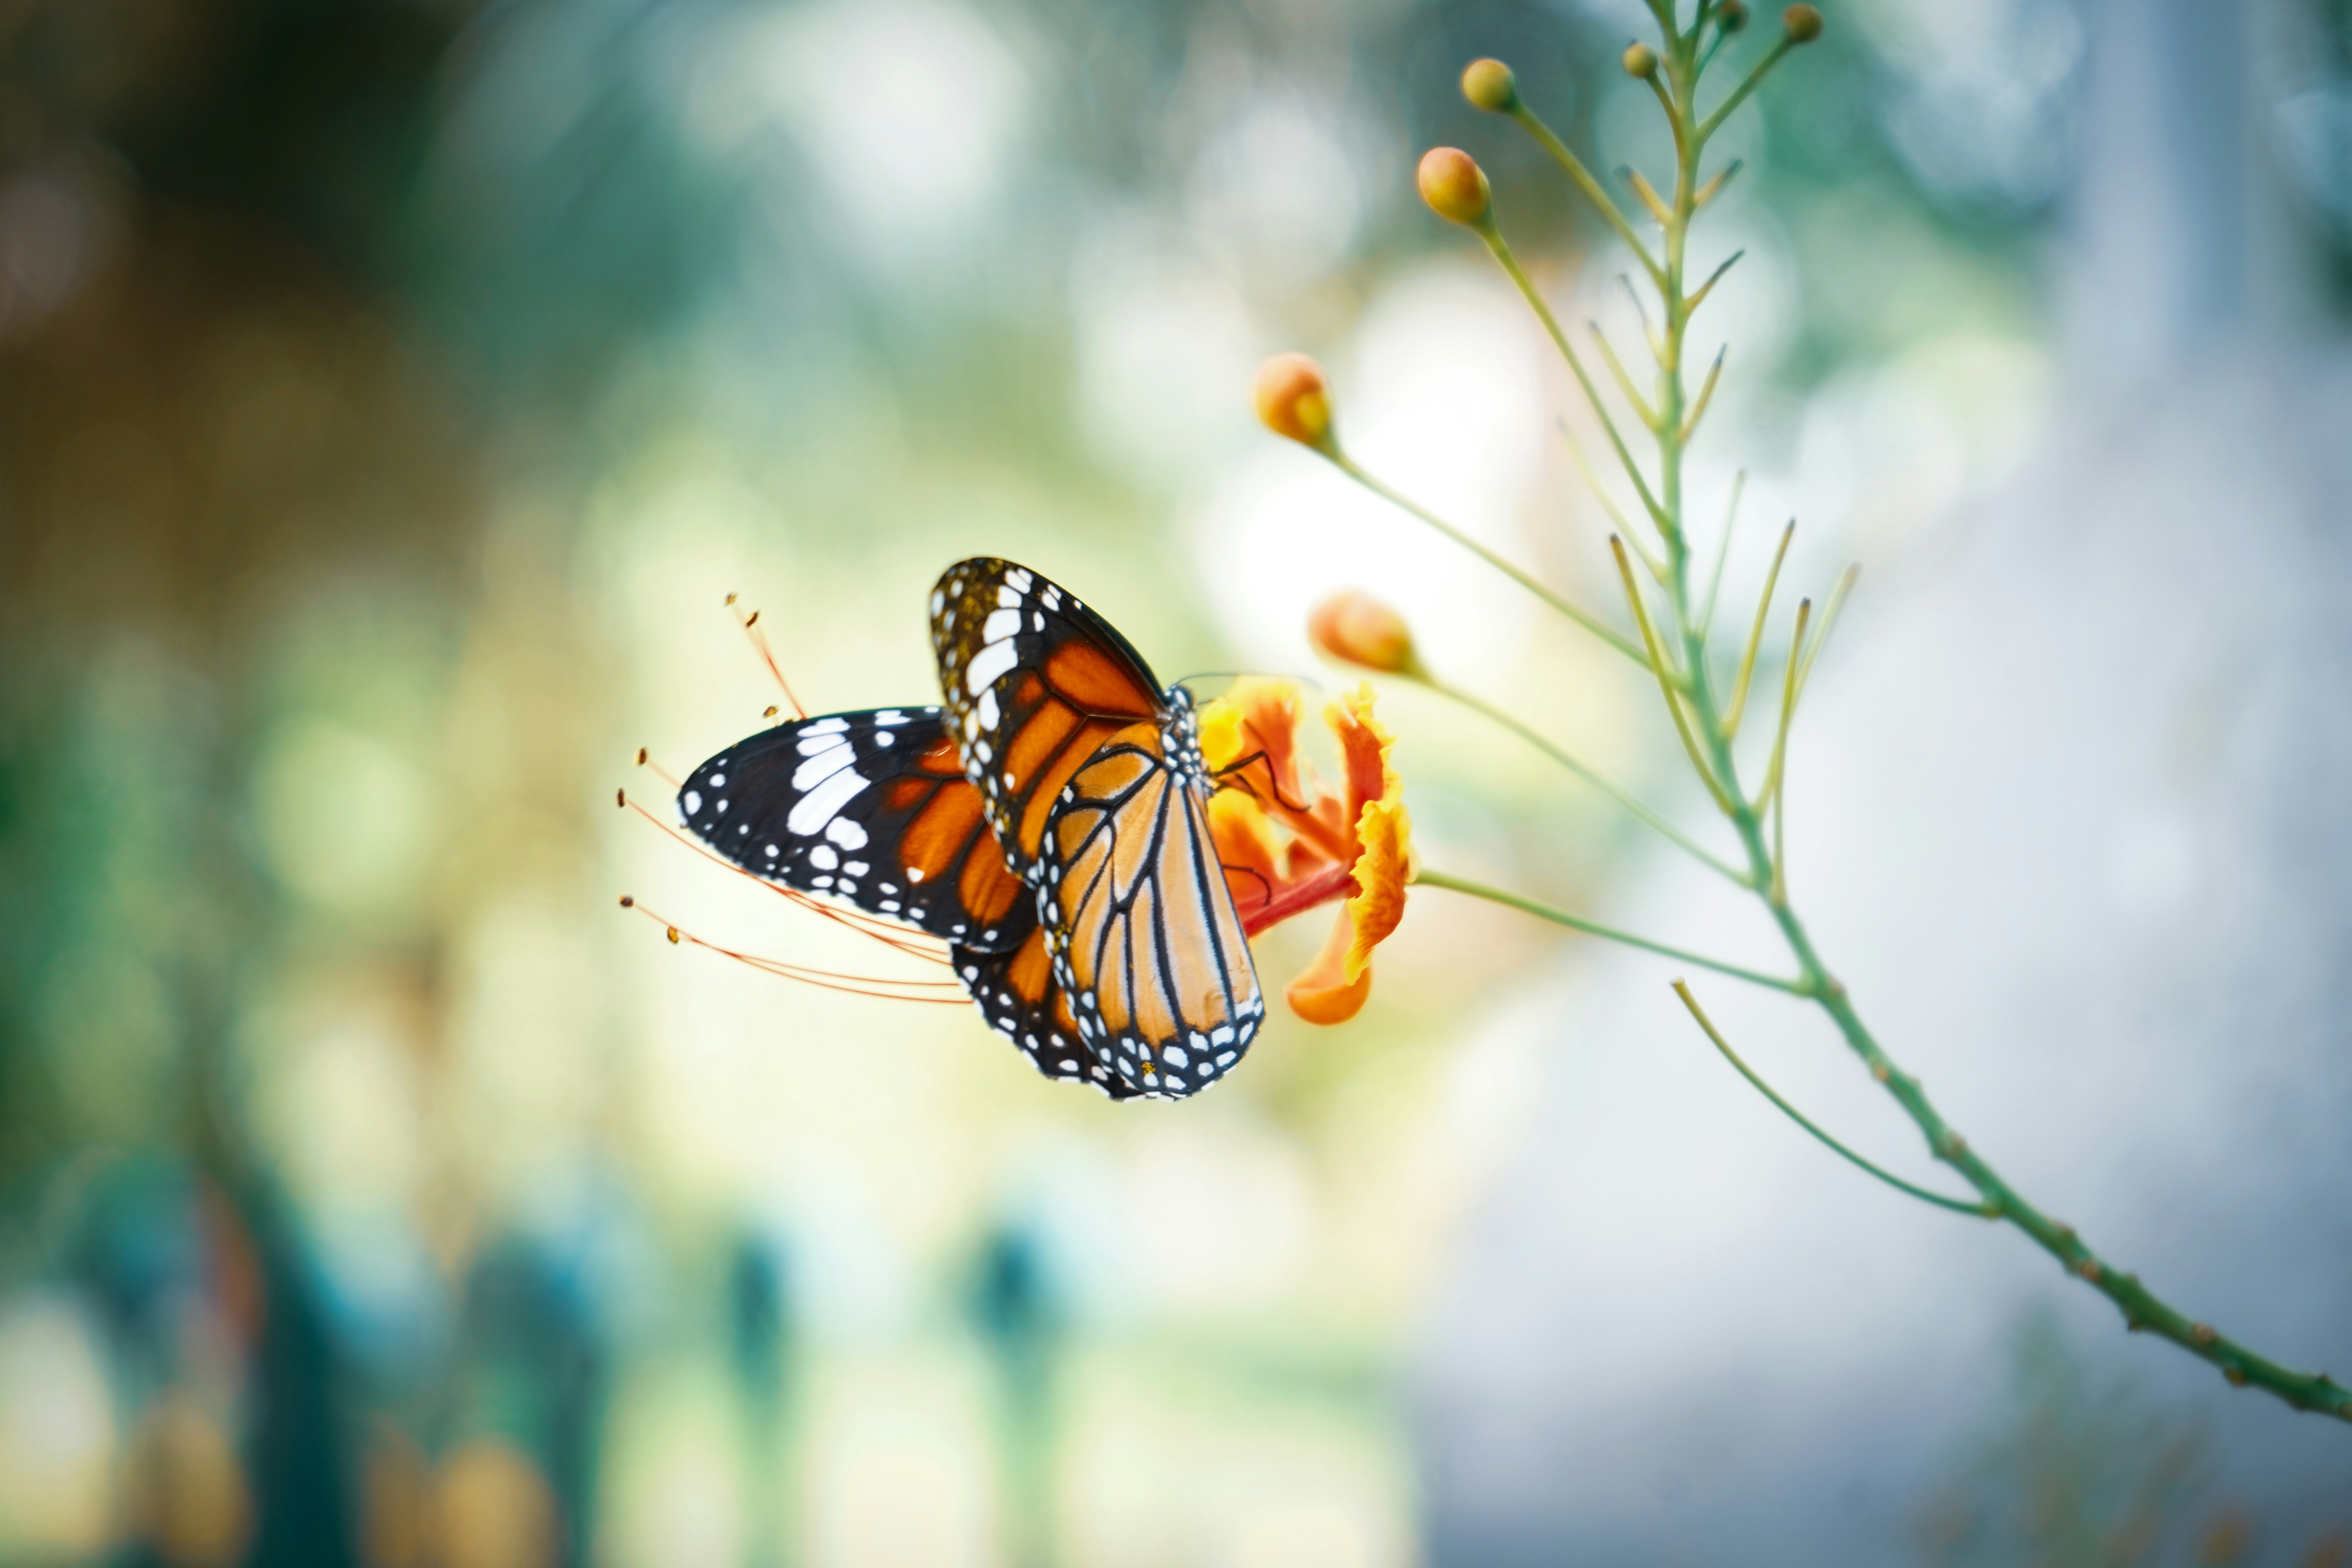 monarch butterfly on slim plant with blurred green and yellow background